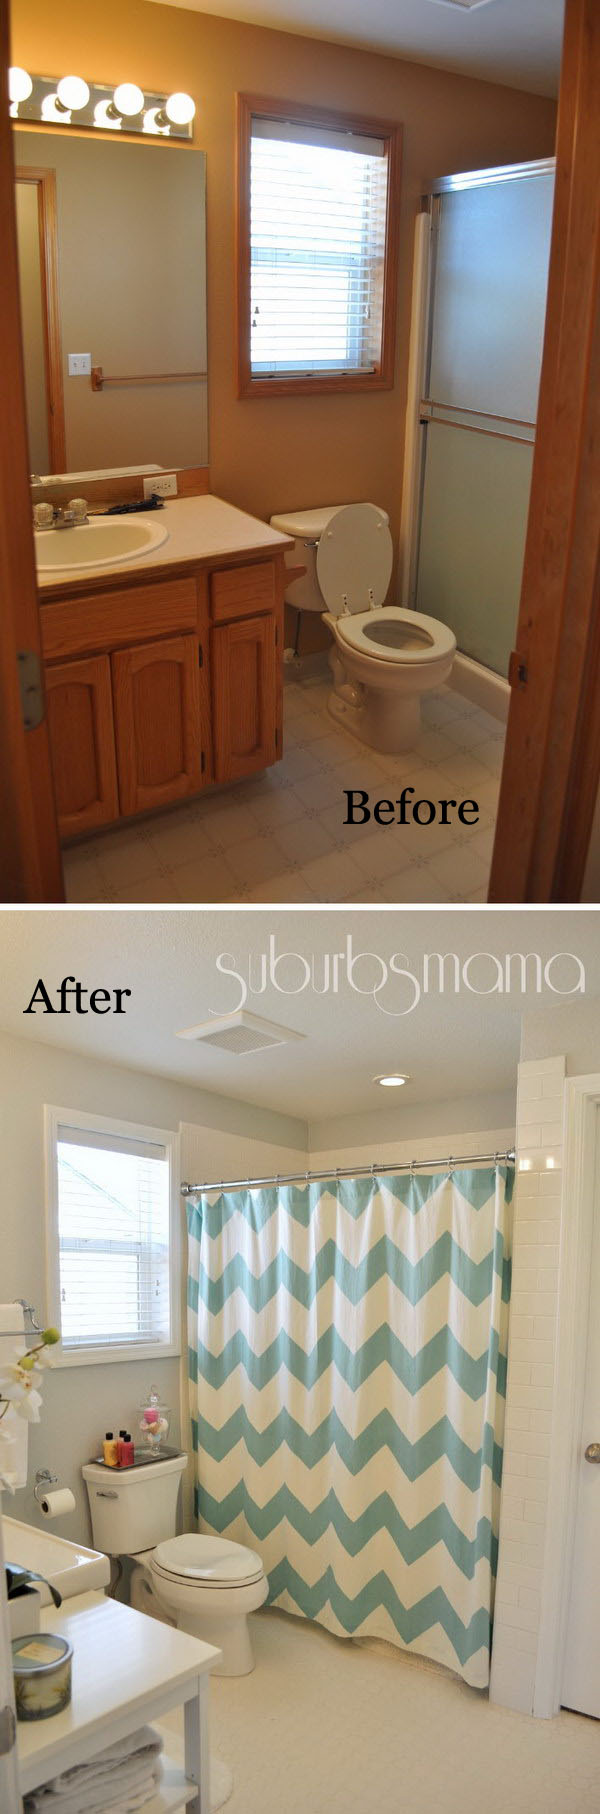 27-28-bathroom-remodel-before-and-after